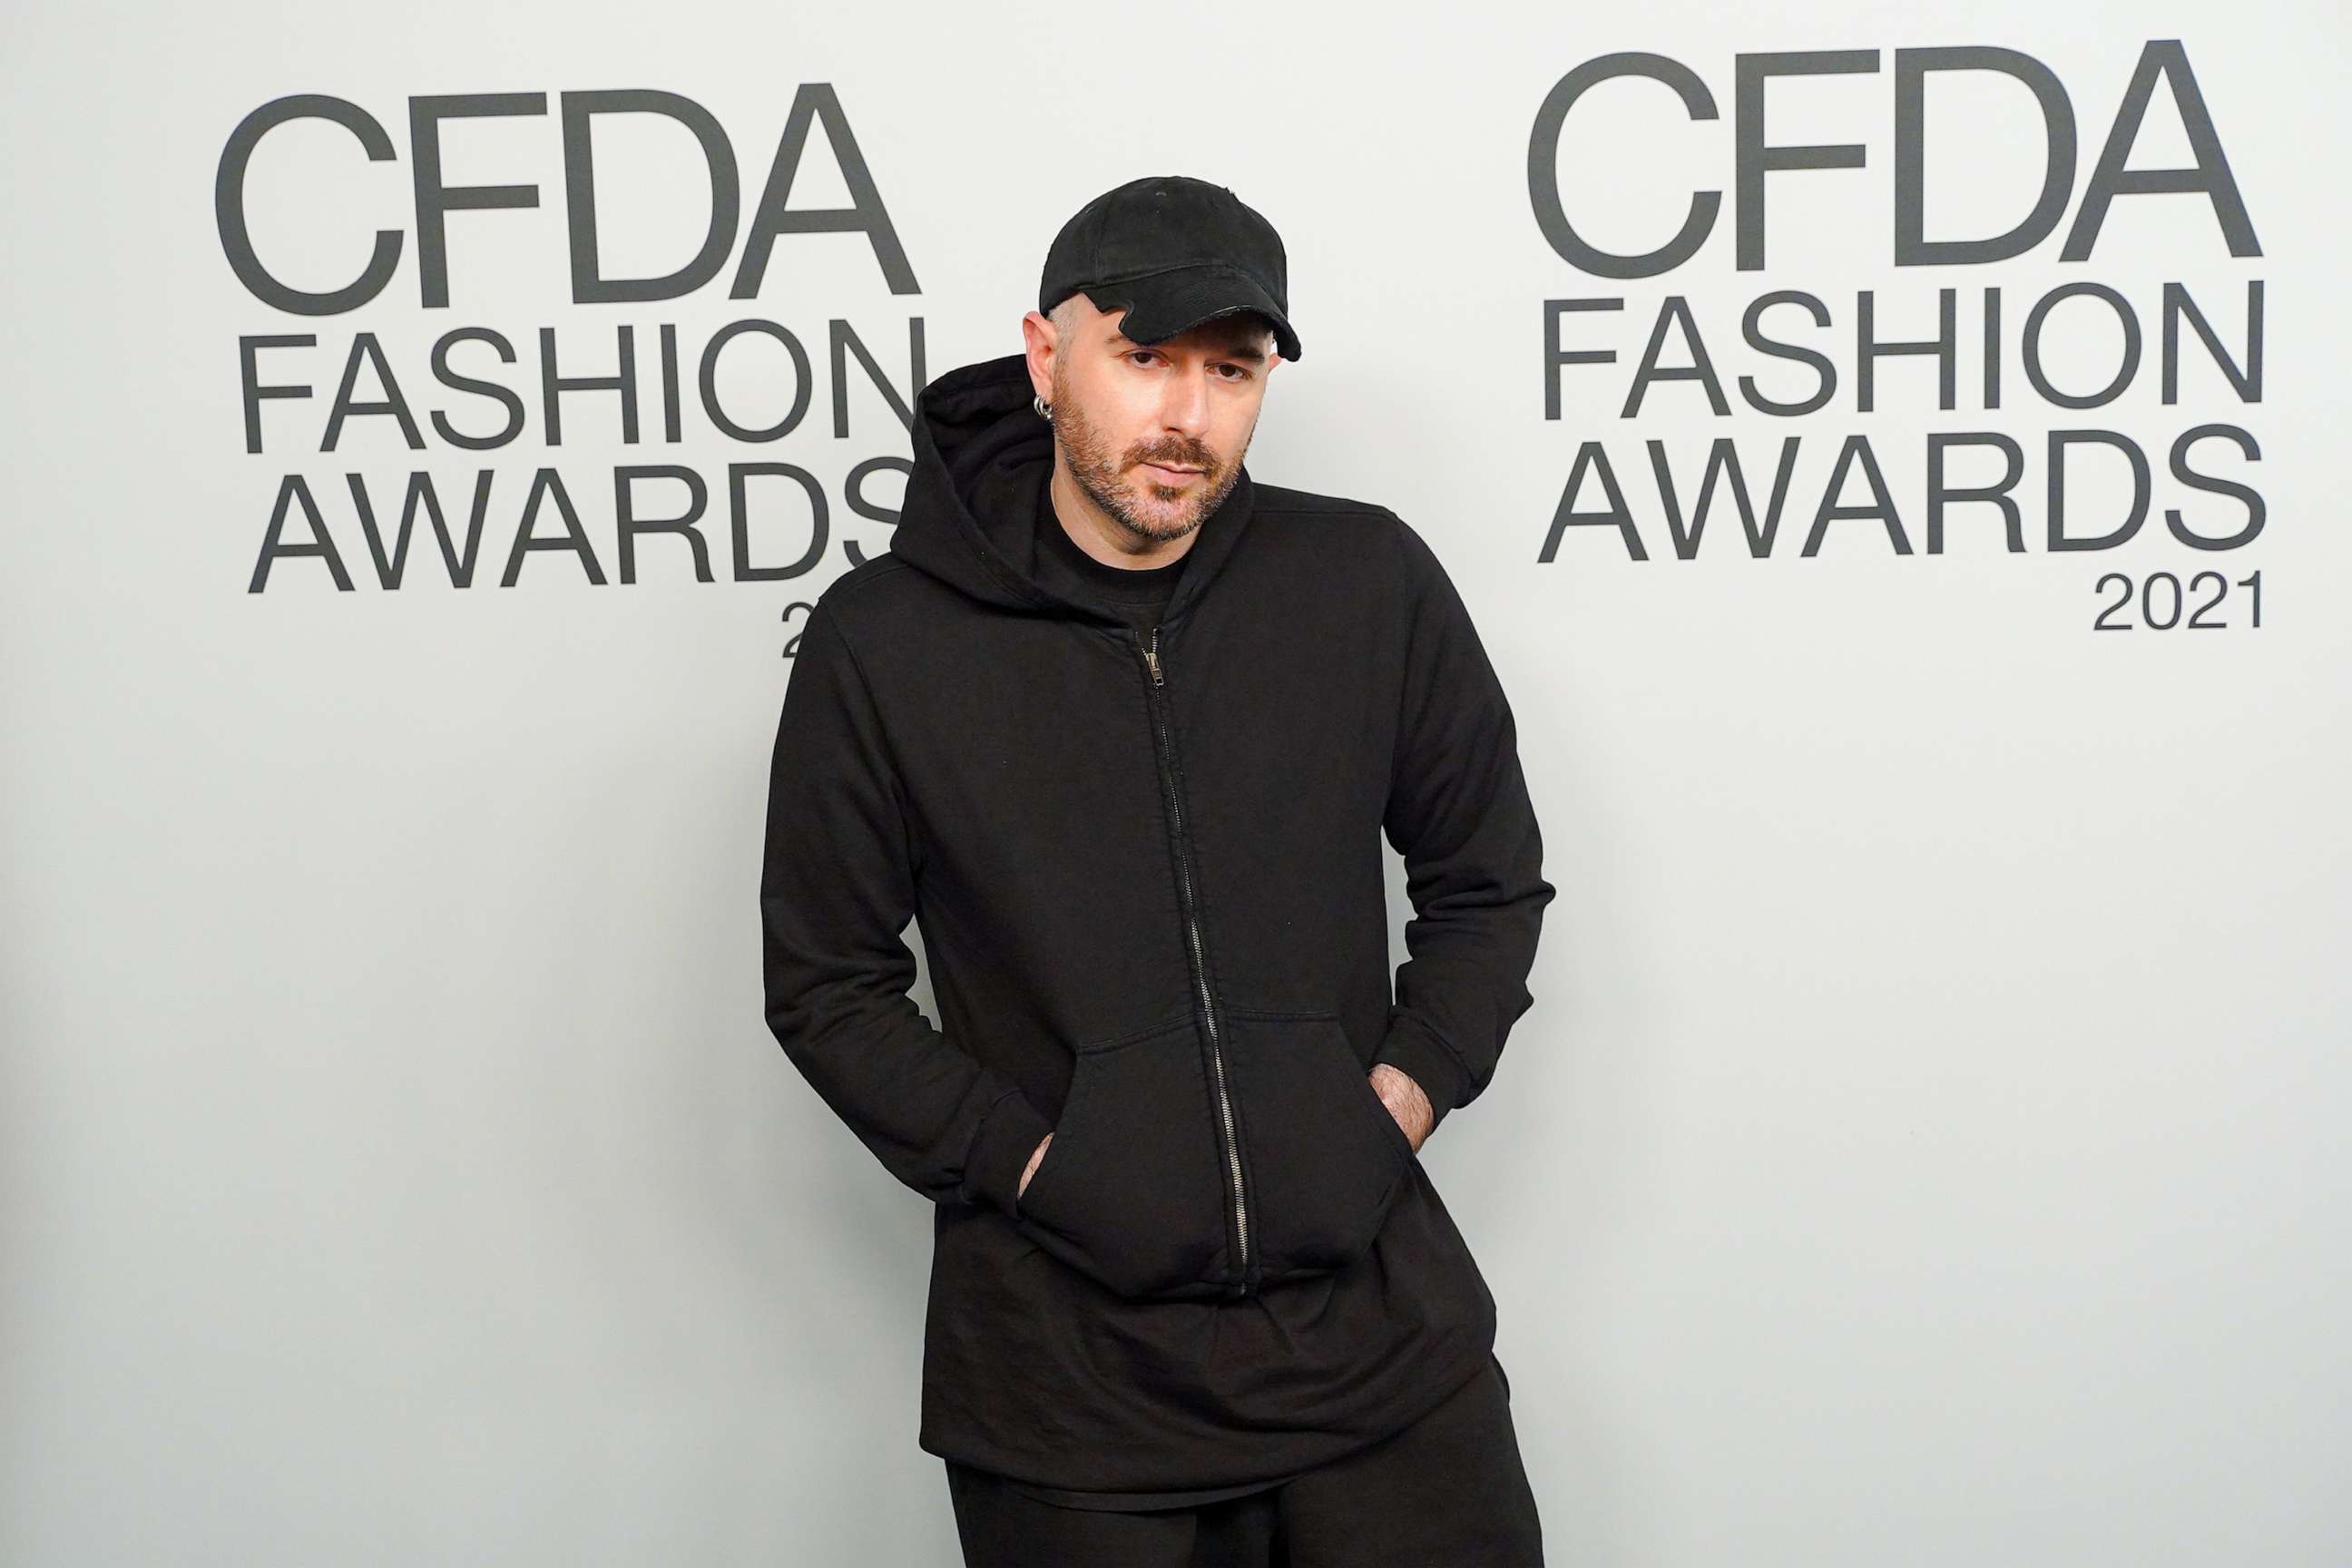 PHOTO: Demna Gvasalia attends the 2021 CFDA Fashion Awards at The Grill & The Pool Restaurants, Nov. 10, 2021, in New York City.